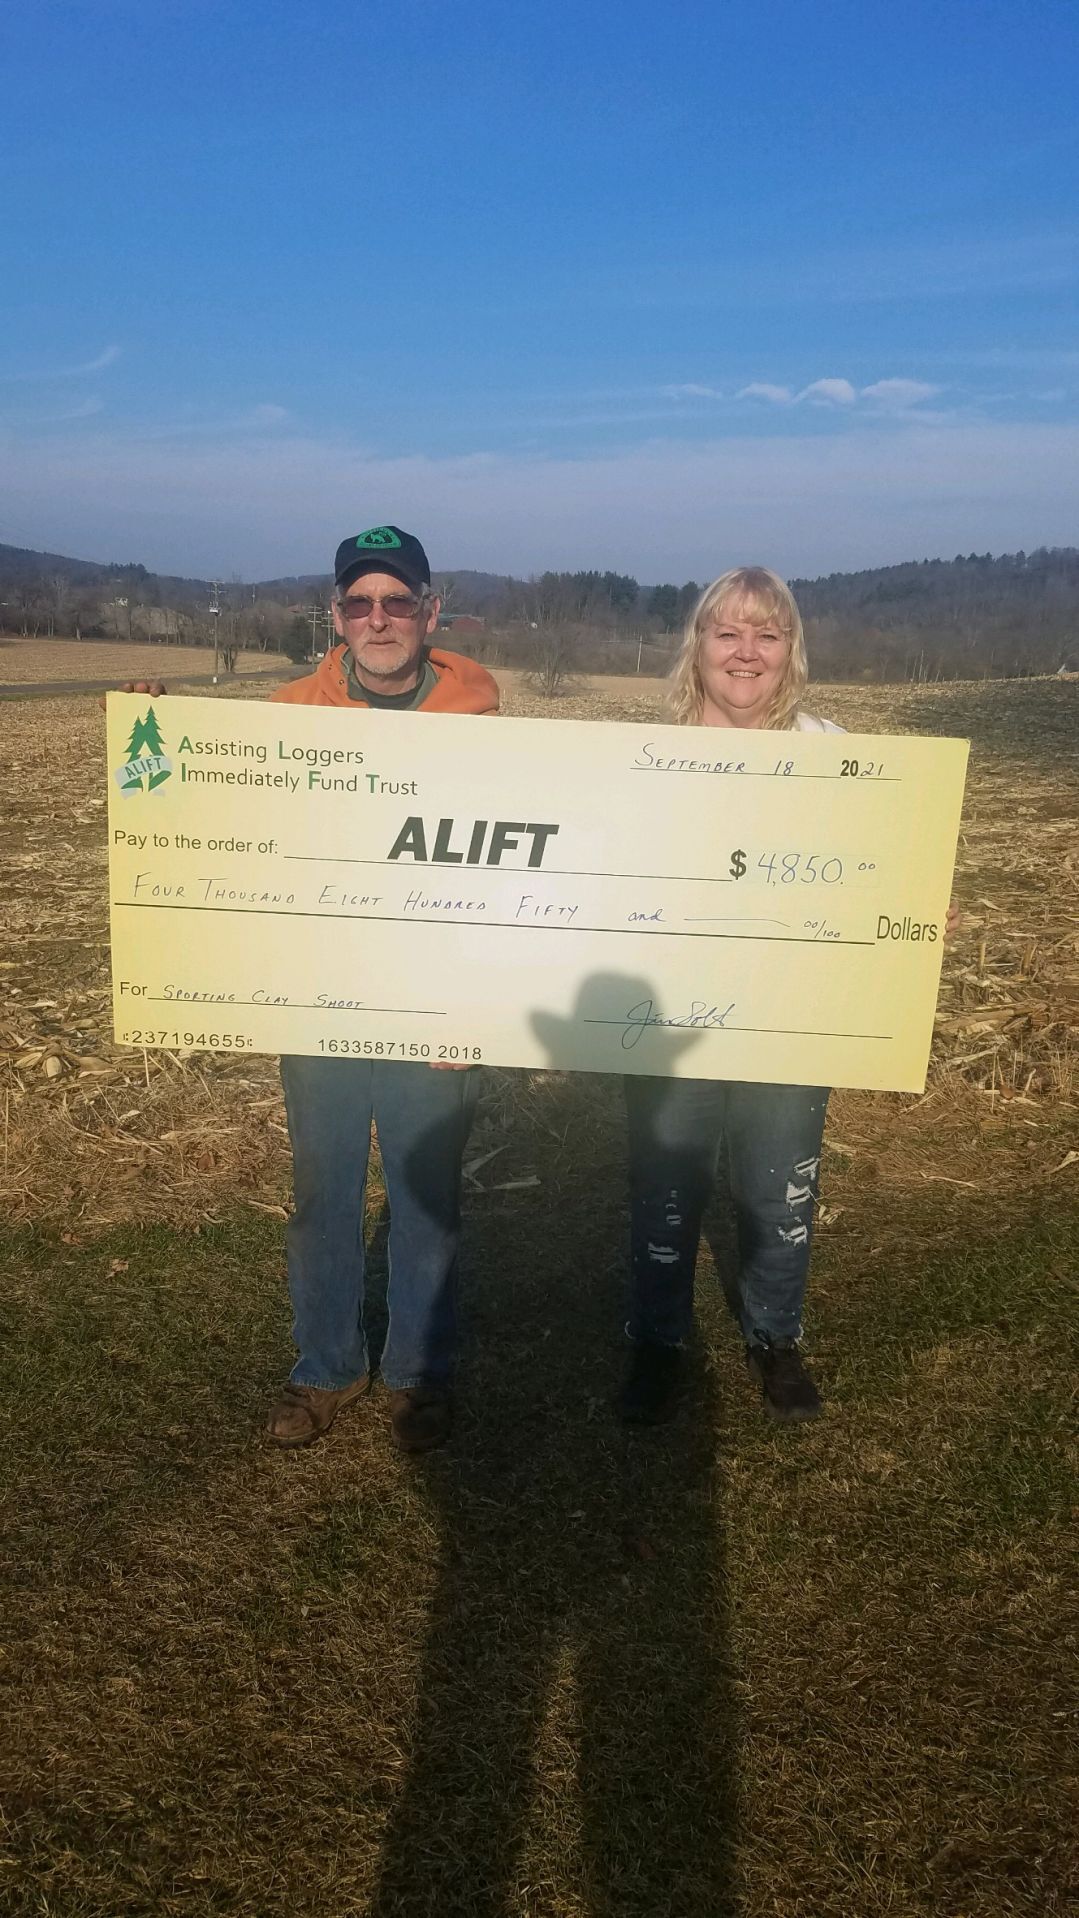 ALIFT supports logging accident victims